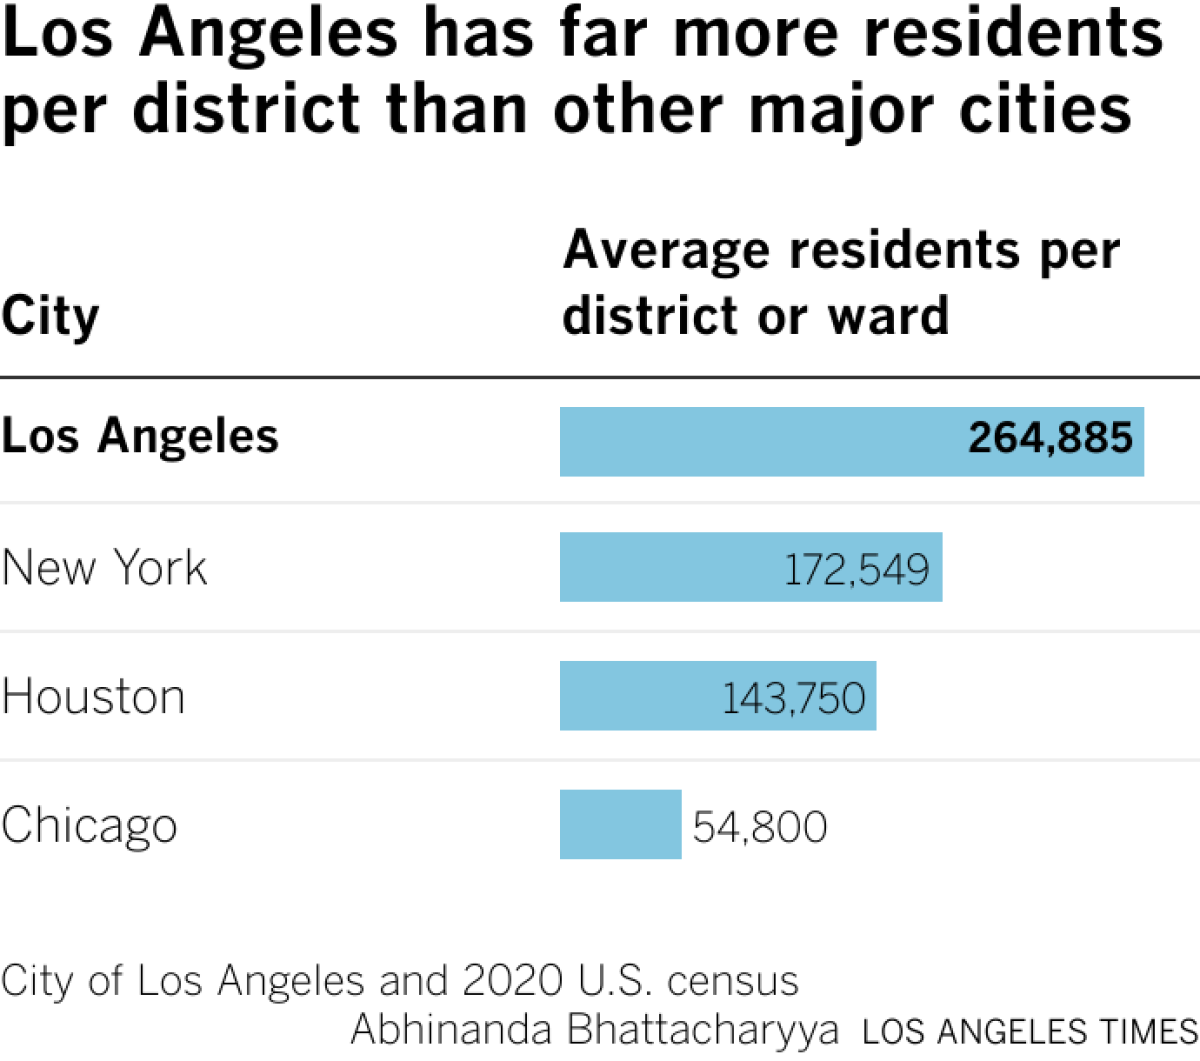 Los Angeles has far more residents per district than other major cities